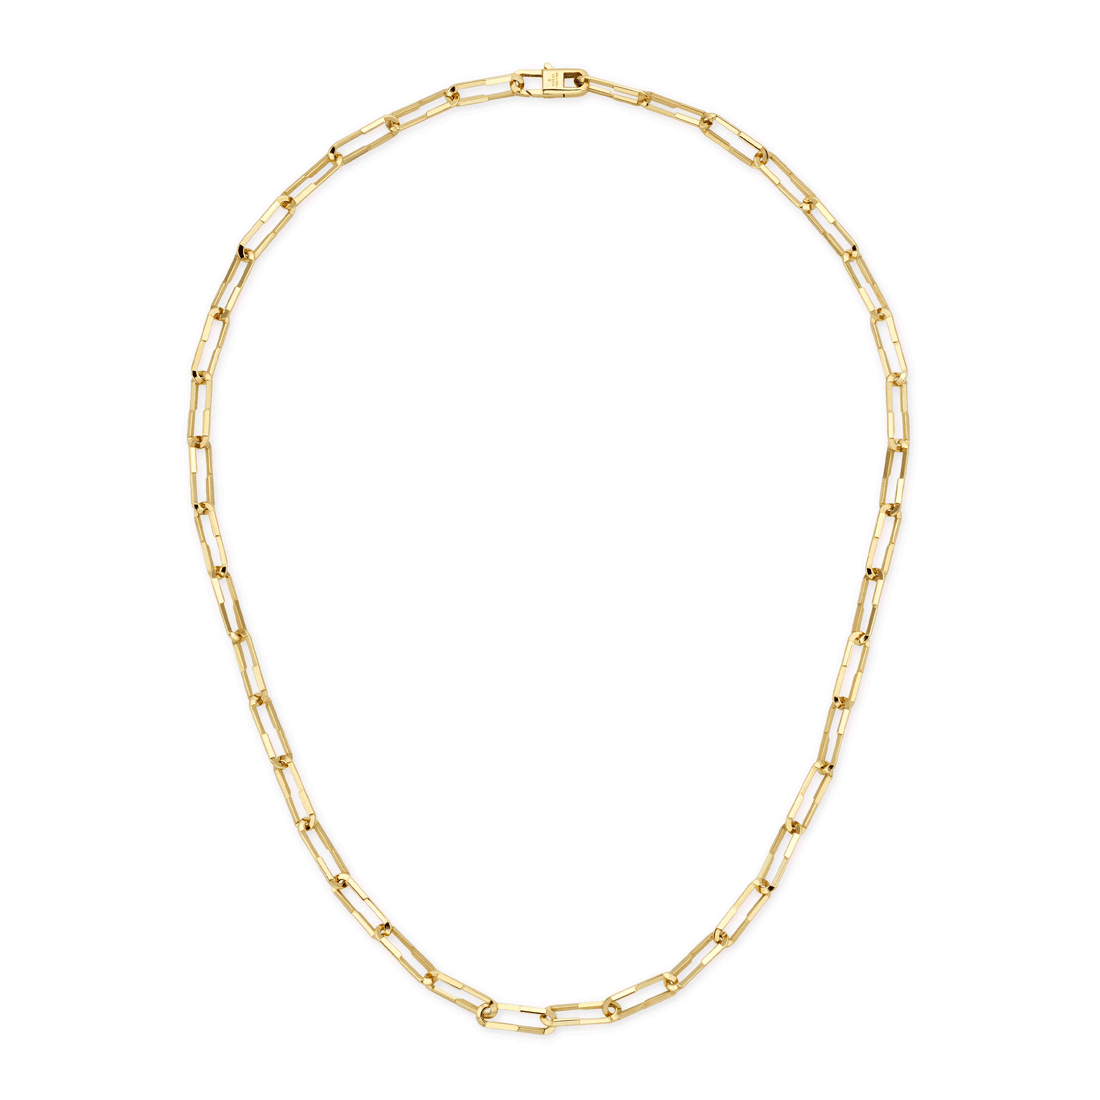 Gucci "Link to Love" 18kt Yellow Gold Women's Link Necklace